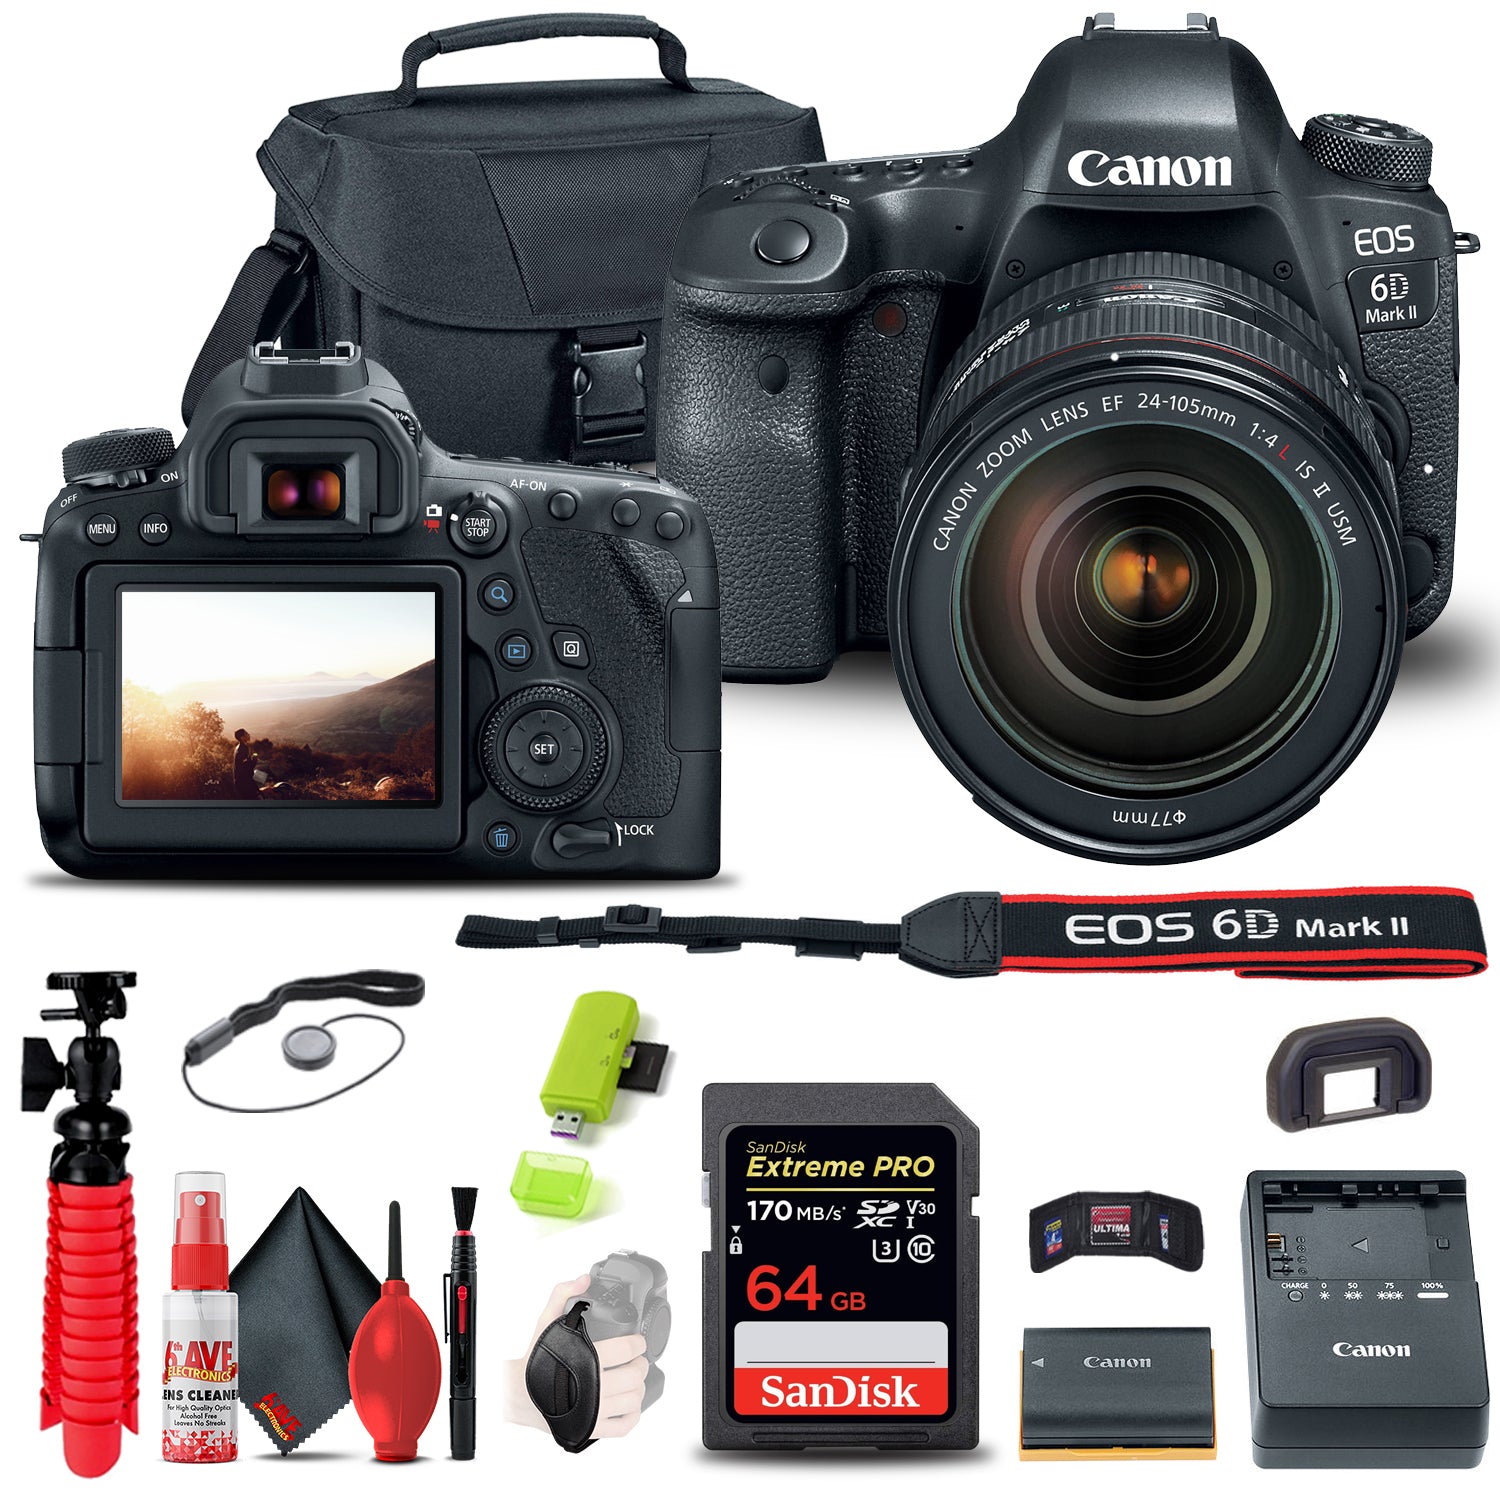 Canon EOS 6D Mark II Camera with 24-105mm f/4L II Lens (1897C009) Extra Storage Bundle